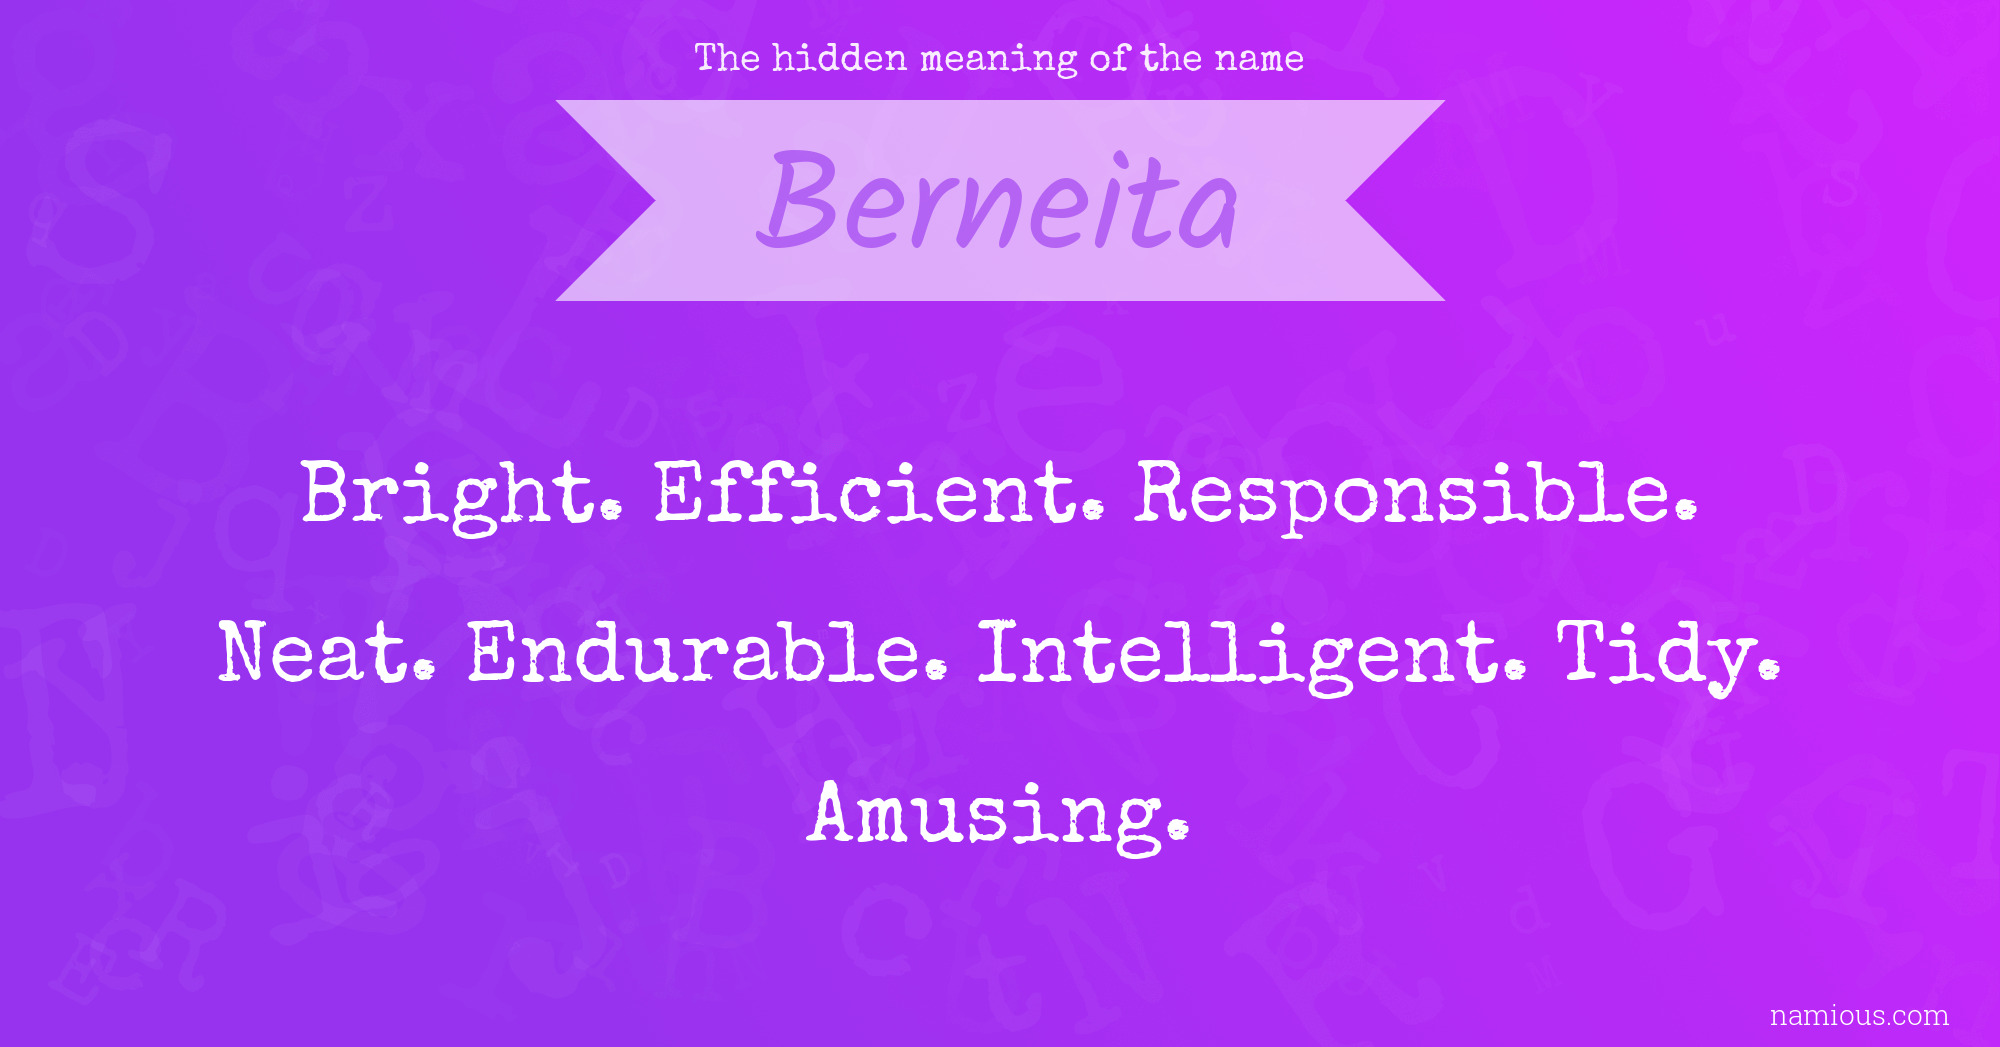 The hidden meaning of the name Berneita